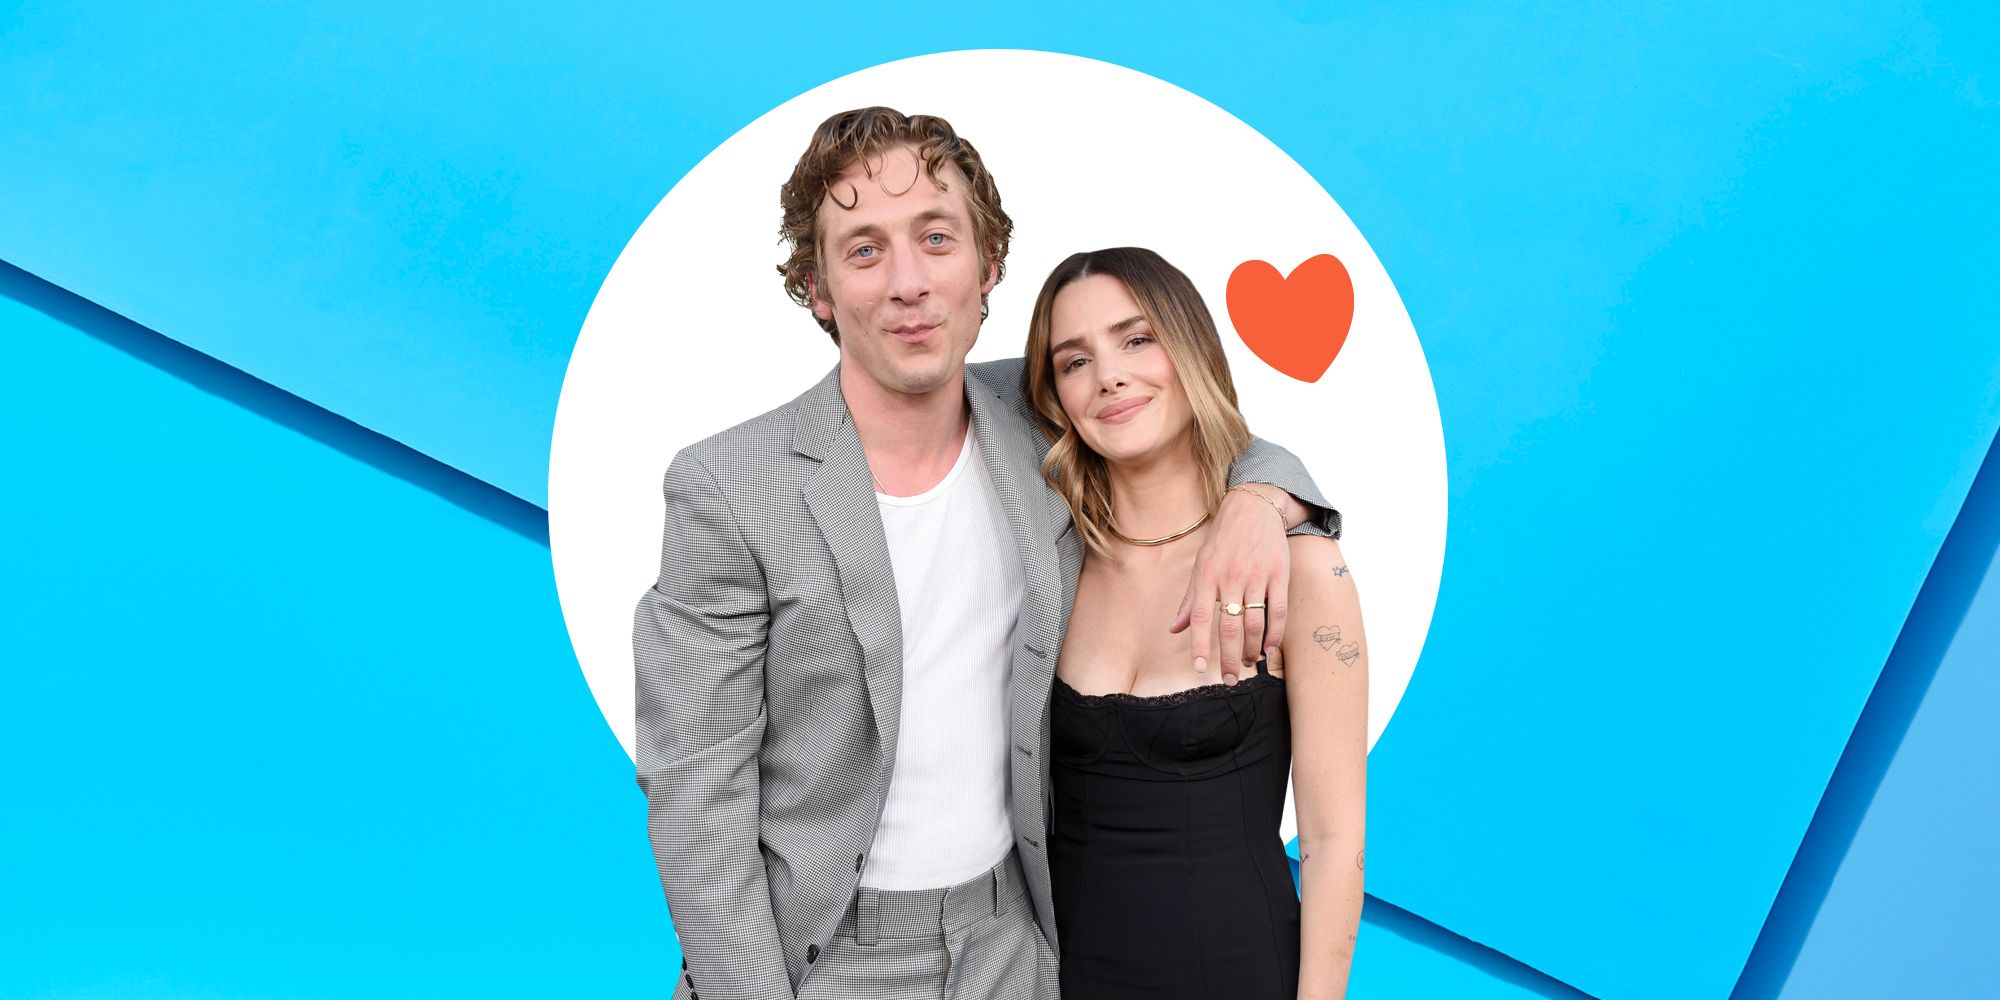 Jeremy Allen White And Wife Addison Timlins Body Language, Explained pic